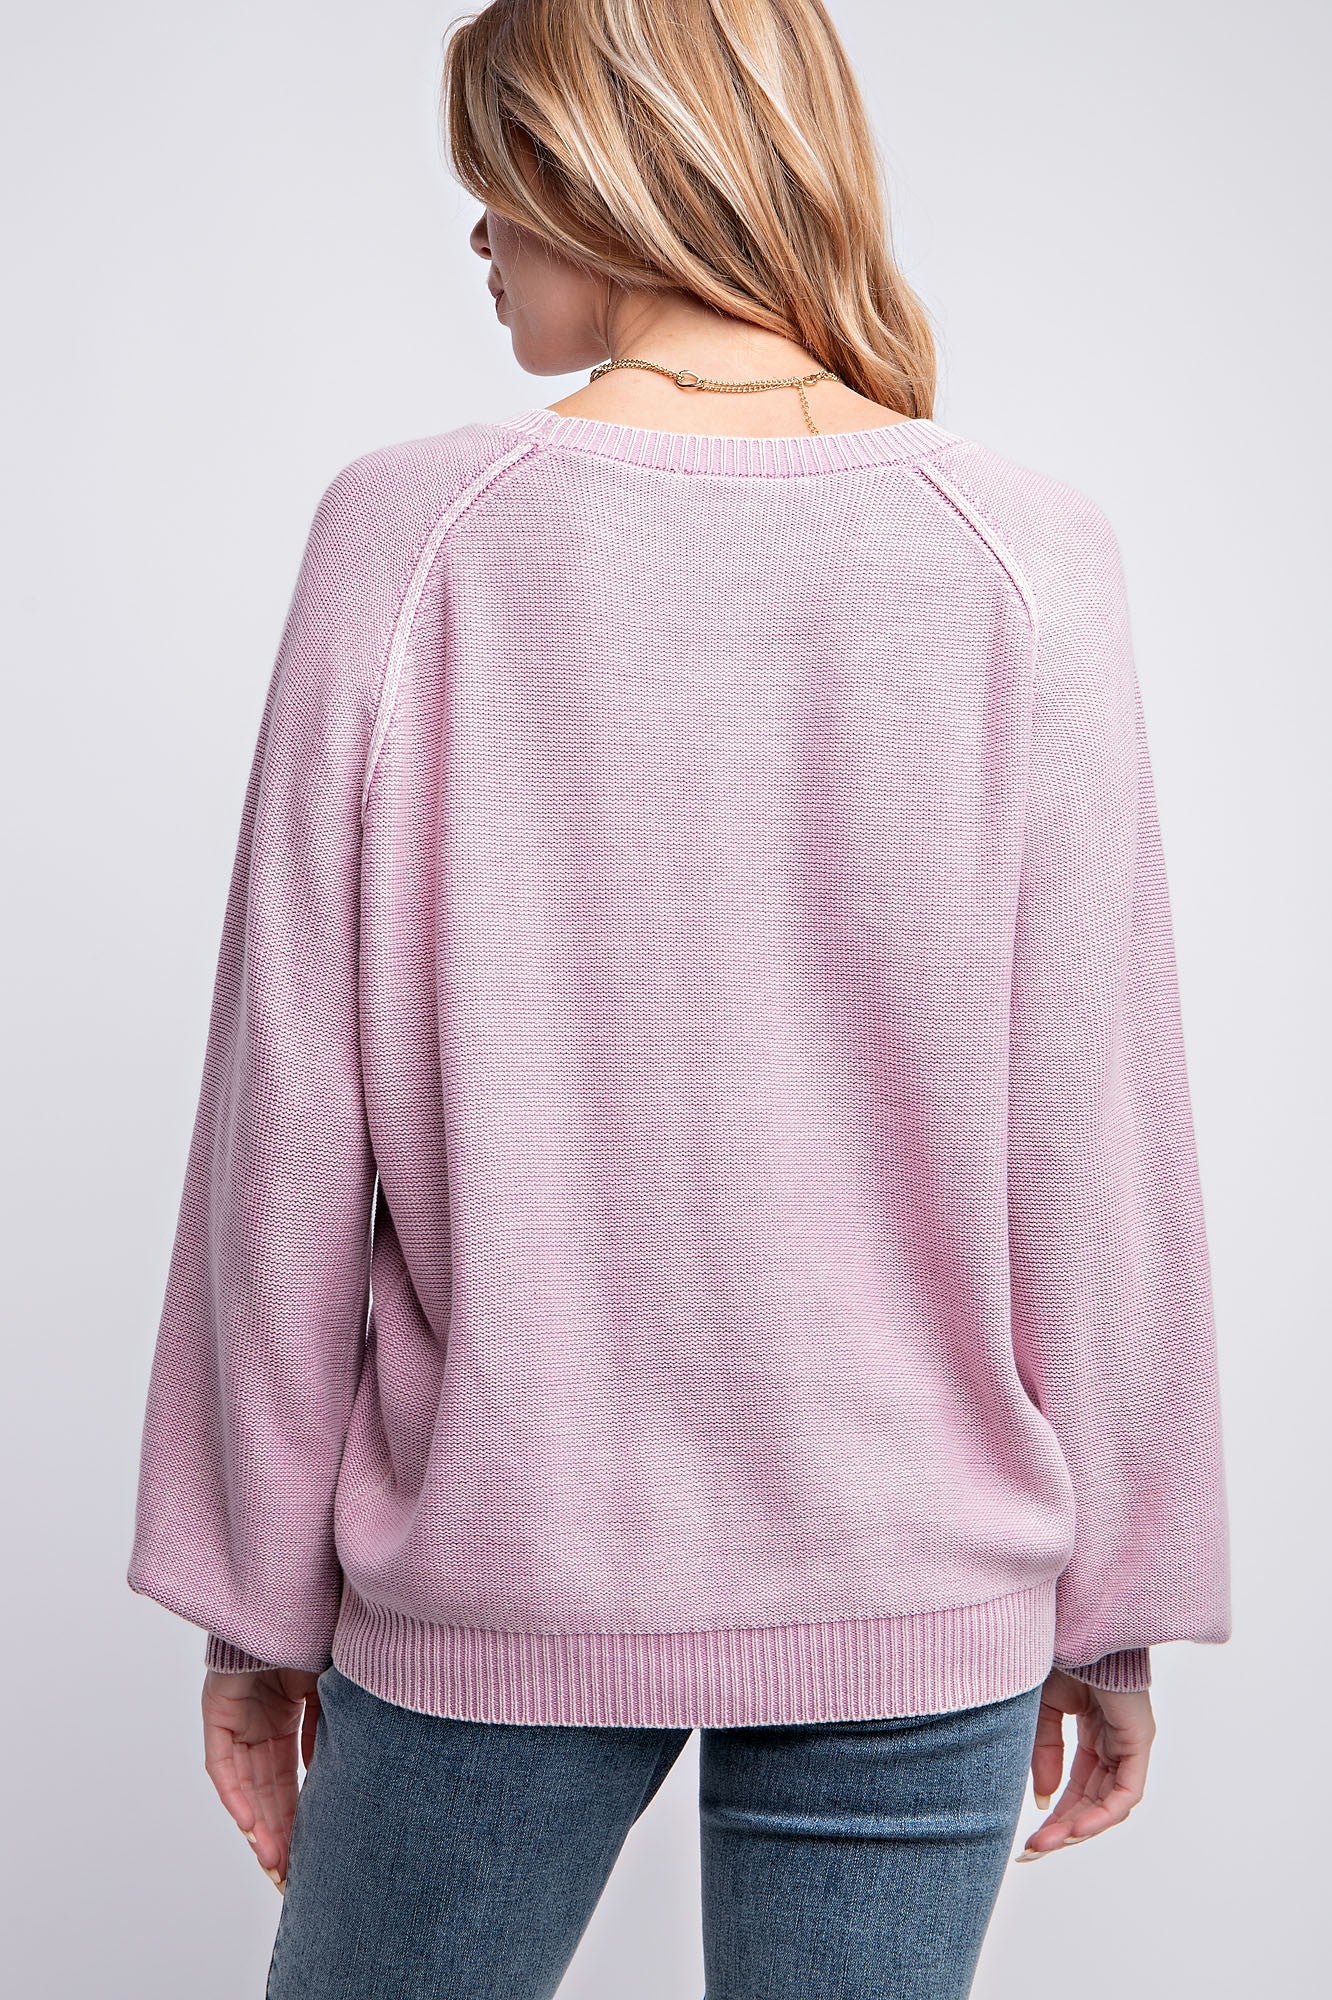 Hillary Mineral Washed Sweater